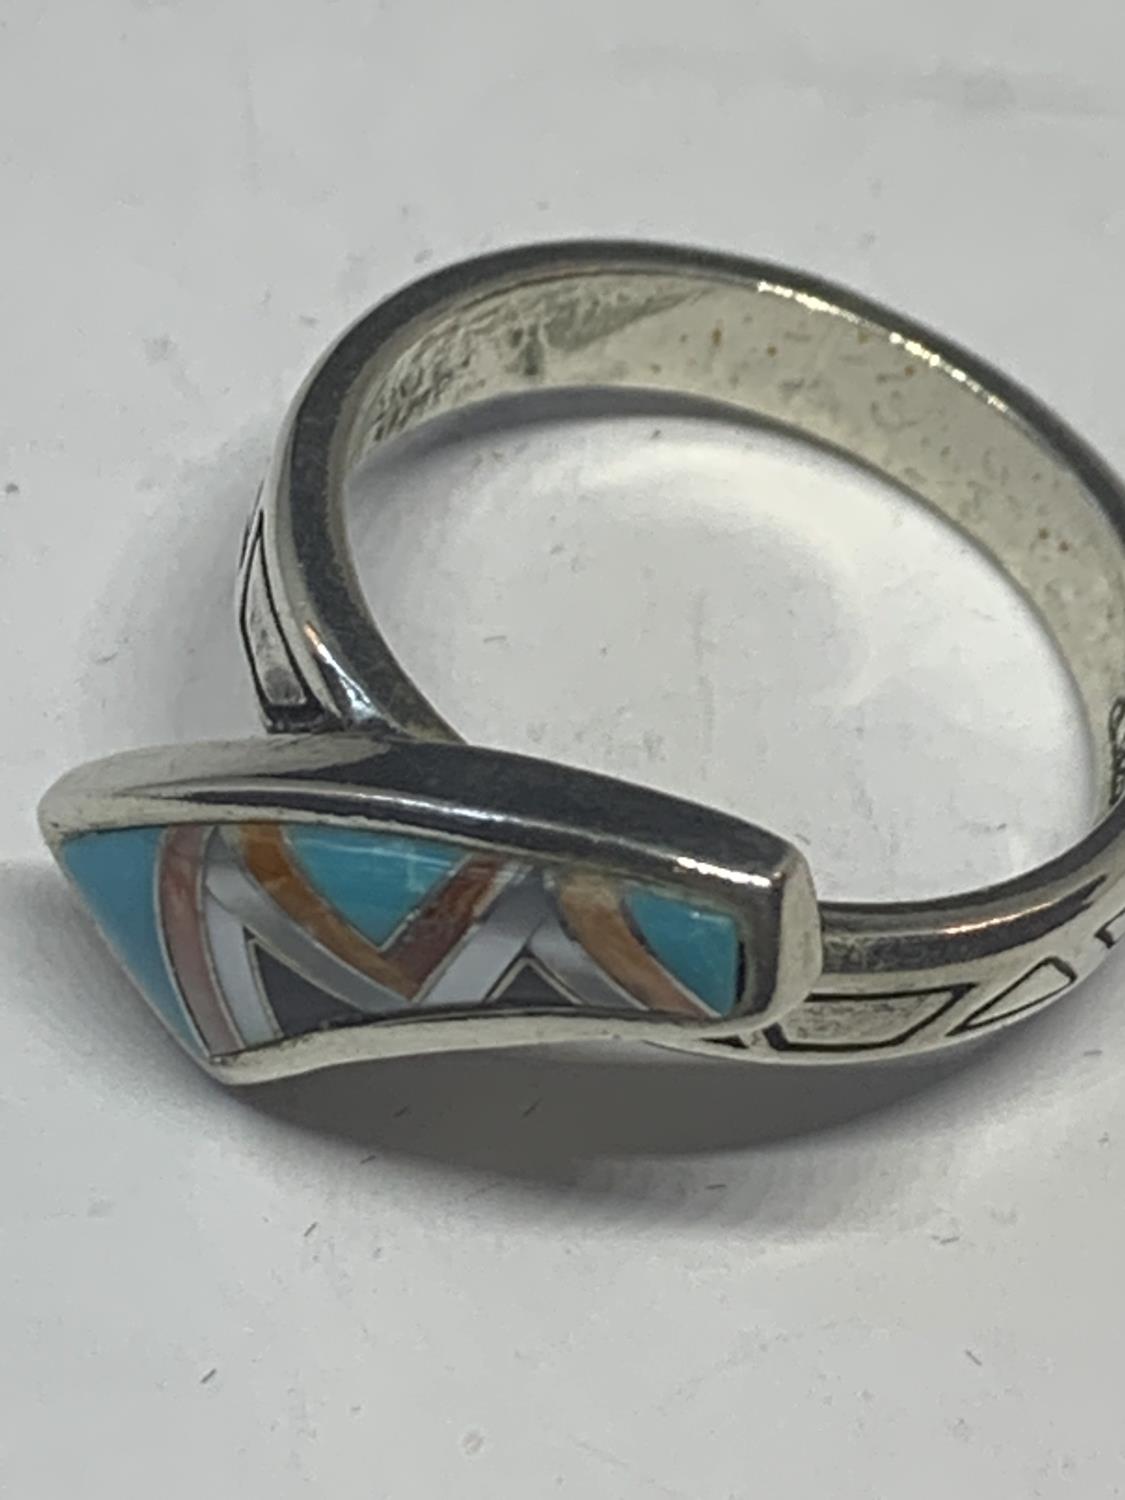 A SILVER RING WITH A NAVAJO STONE DESIGN IN A PRESENTATION BOX - Image 2 of 4